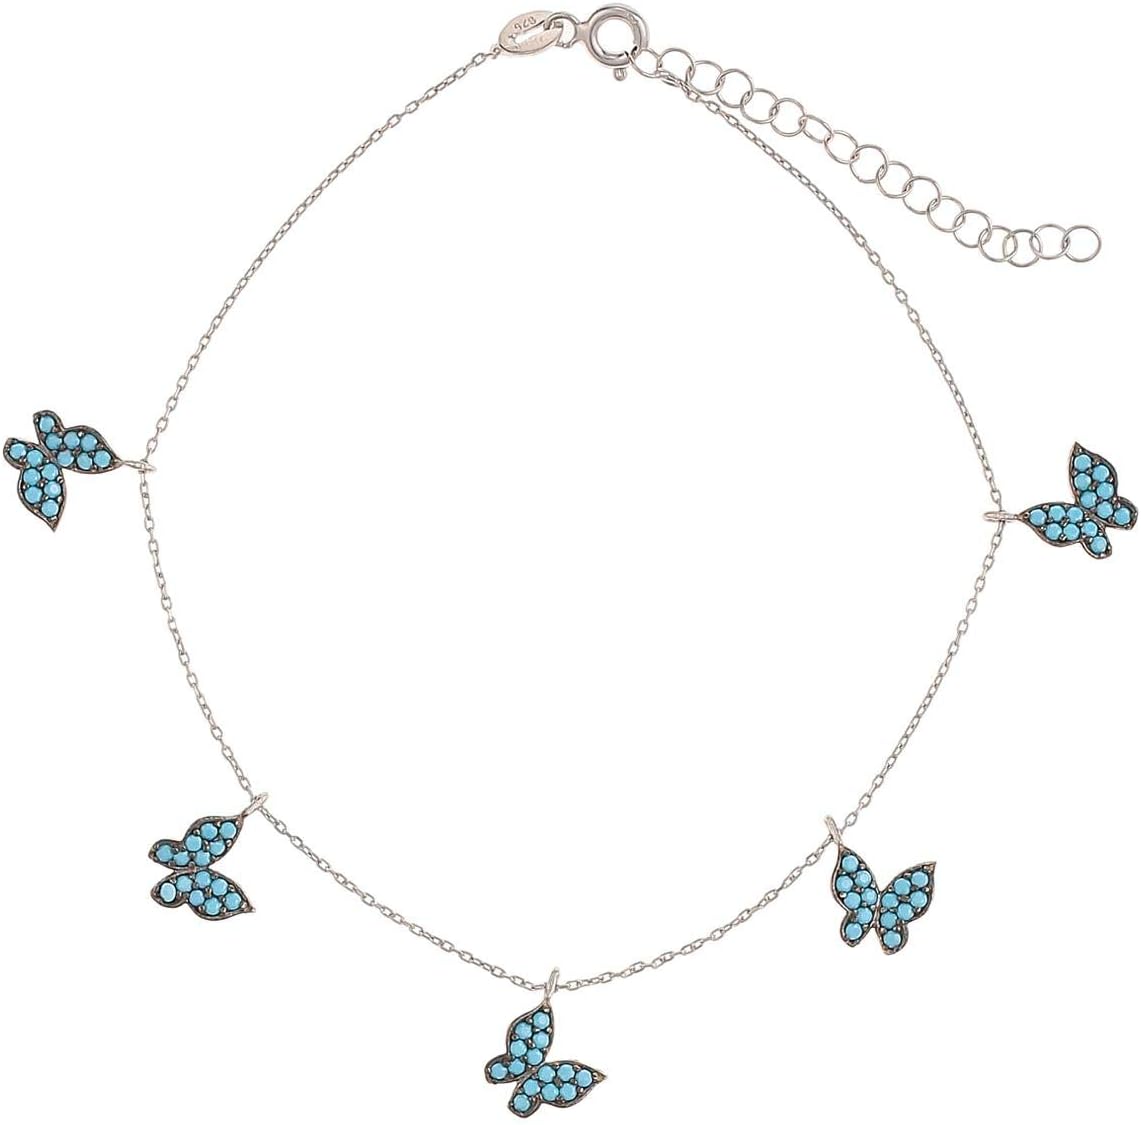 Alwan Silver Short Size Anklet with Butterflies for Women - EE5249BUTTSS